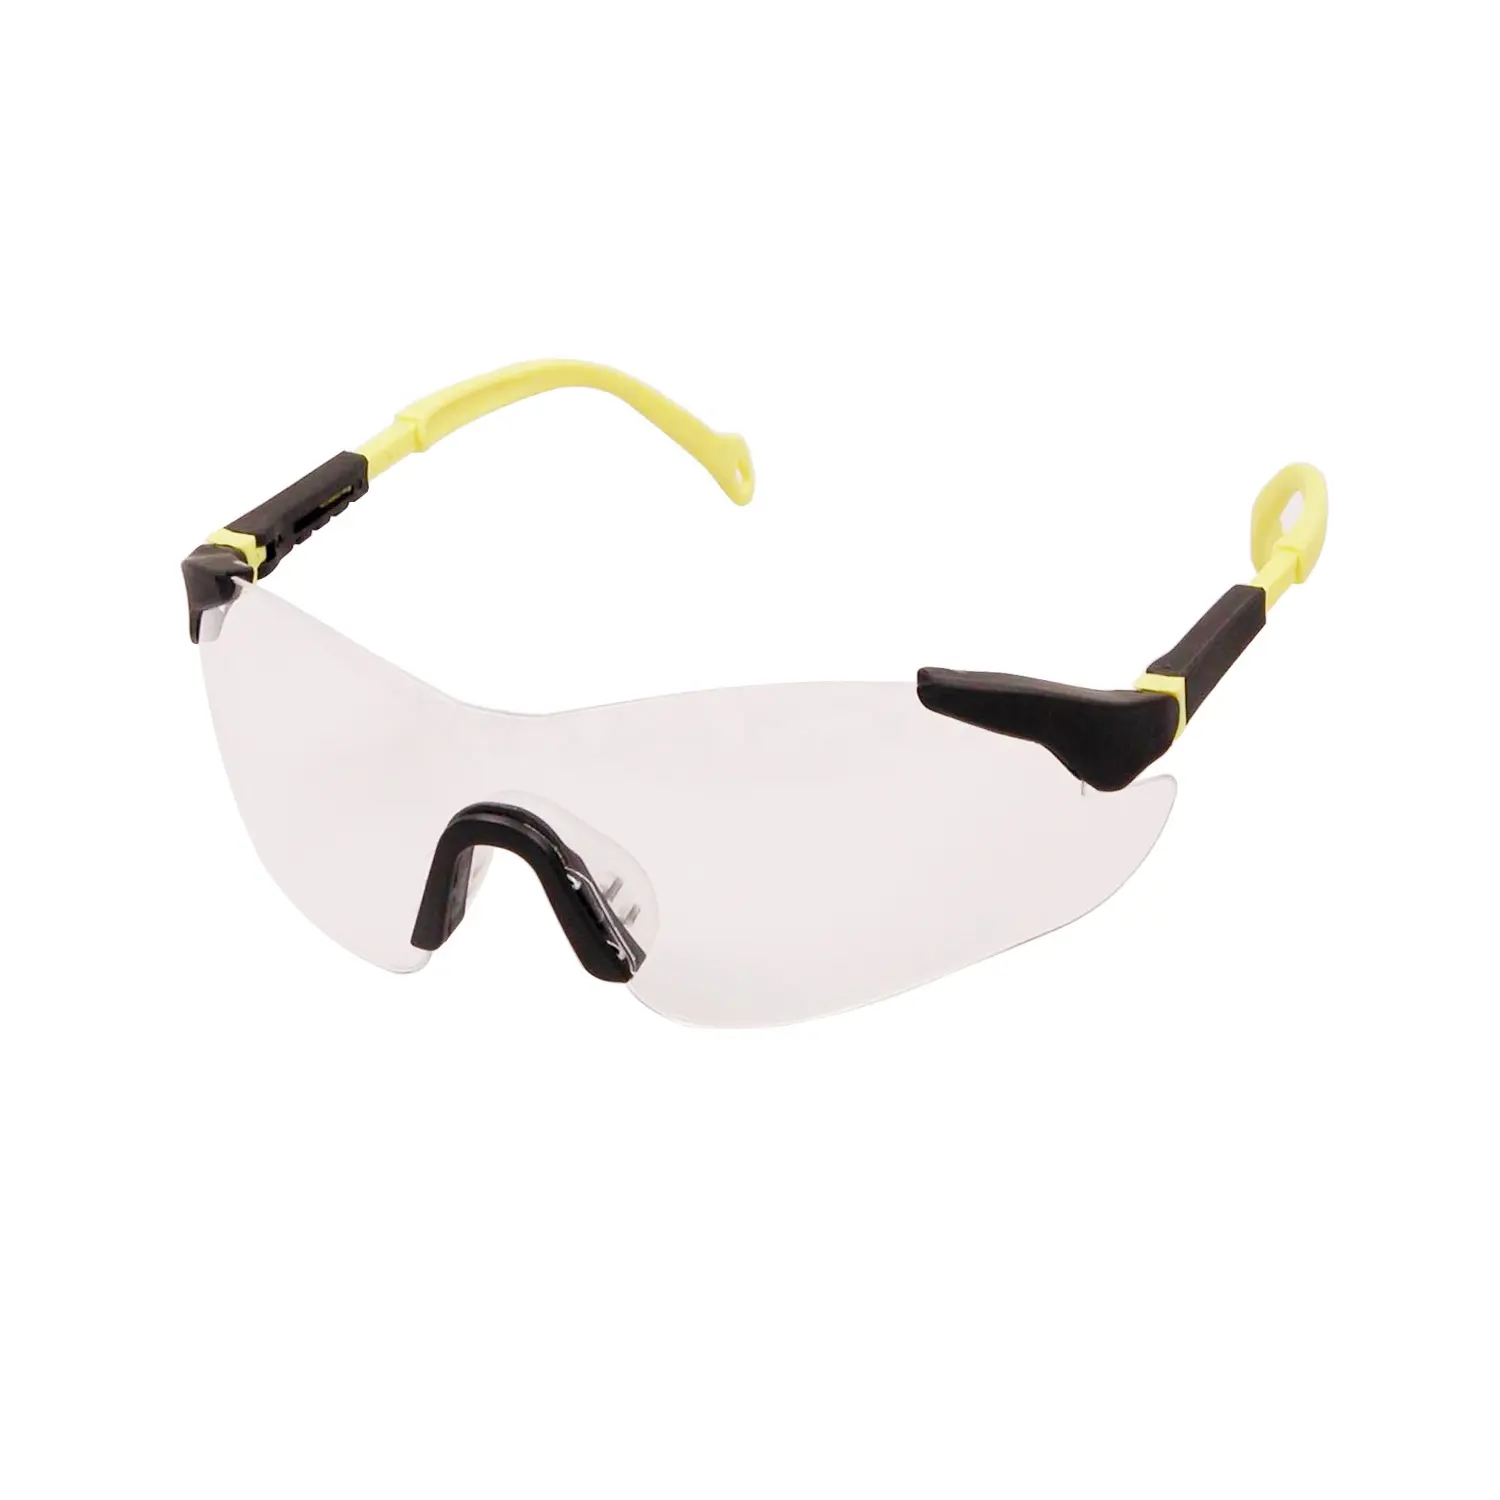 SG1034 Impact Resistant Work Goggles Protective Eyewear Safety Glasses